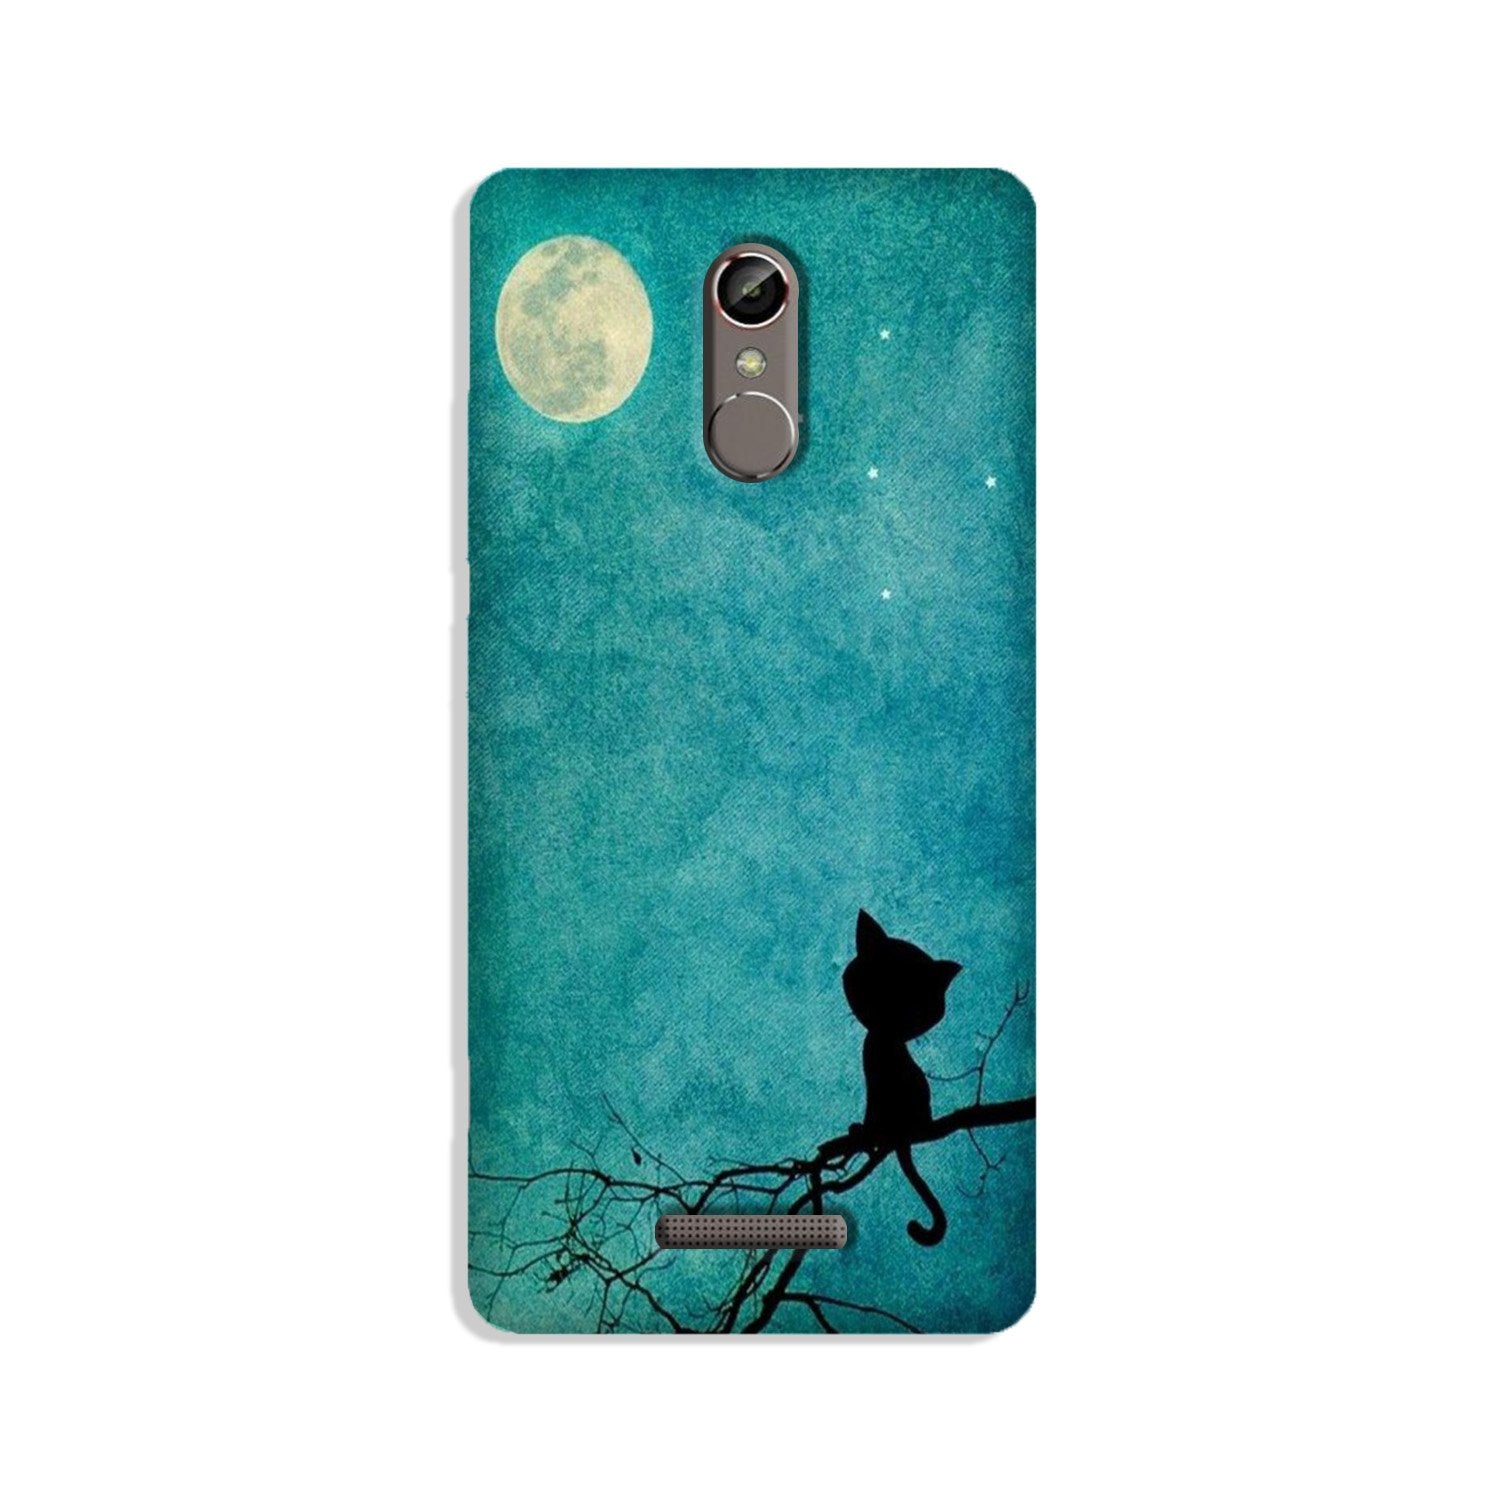 Moon cat Case for Redmi Note 3